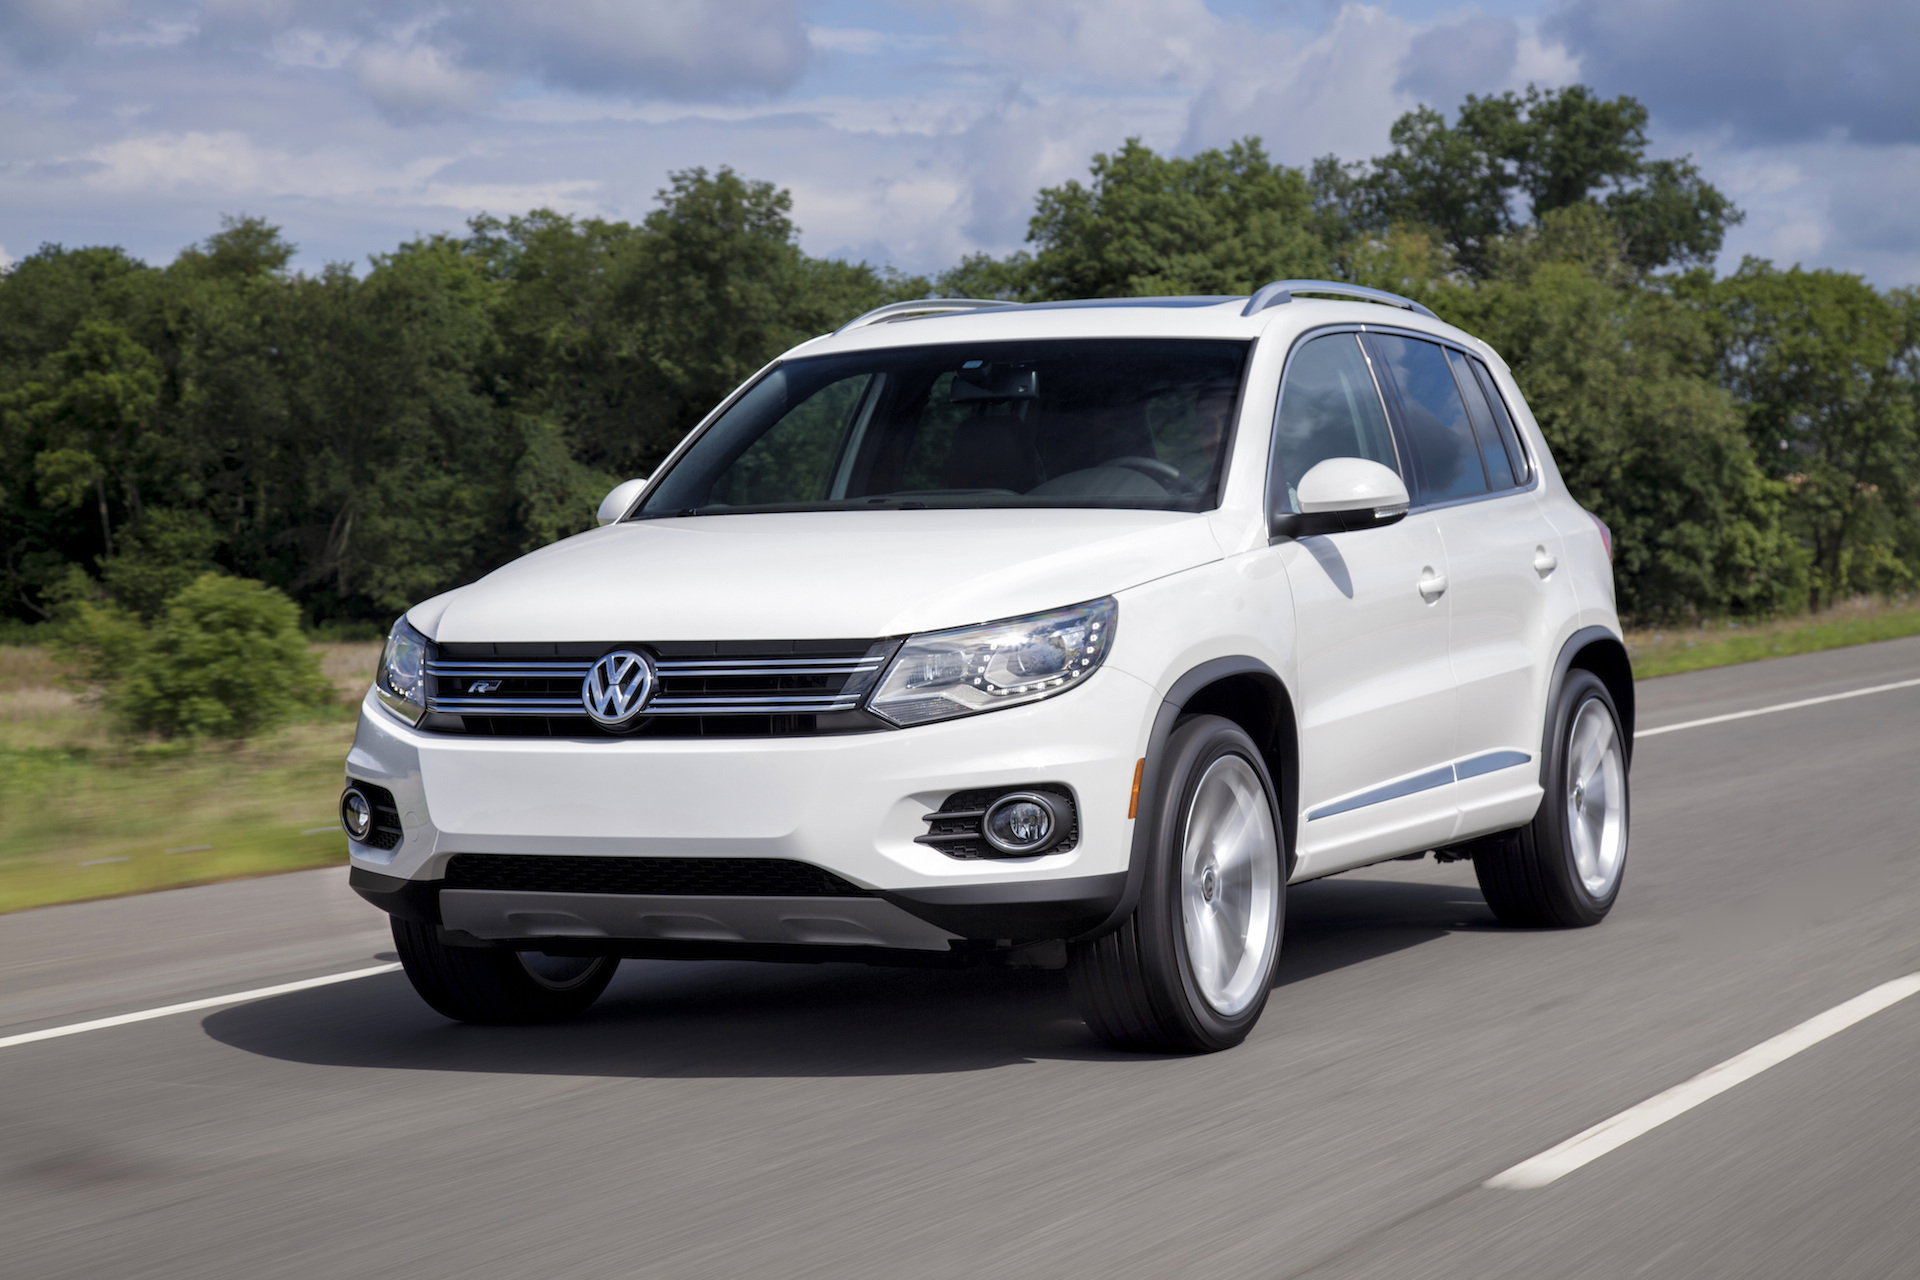 2016 Volkswagen Tiguan (VW) Review, Ratings, Specs, Prices, and Photos -  The Car Connection